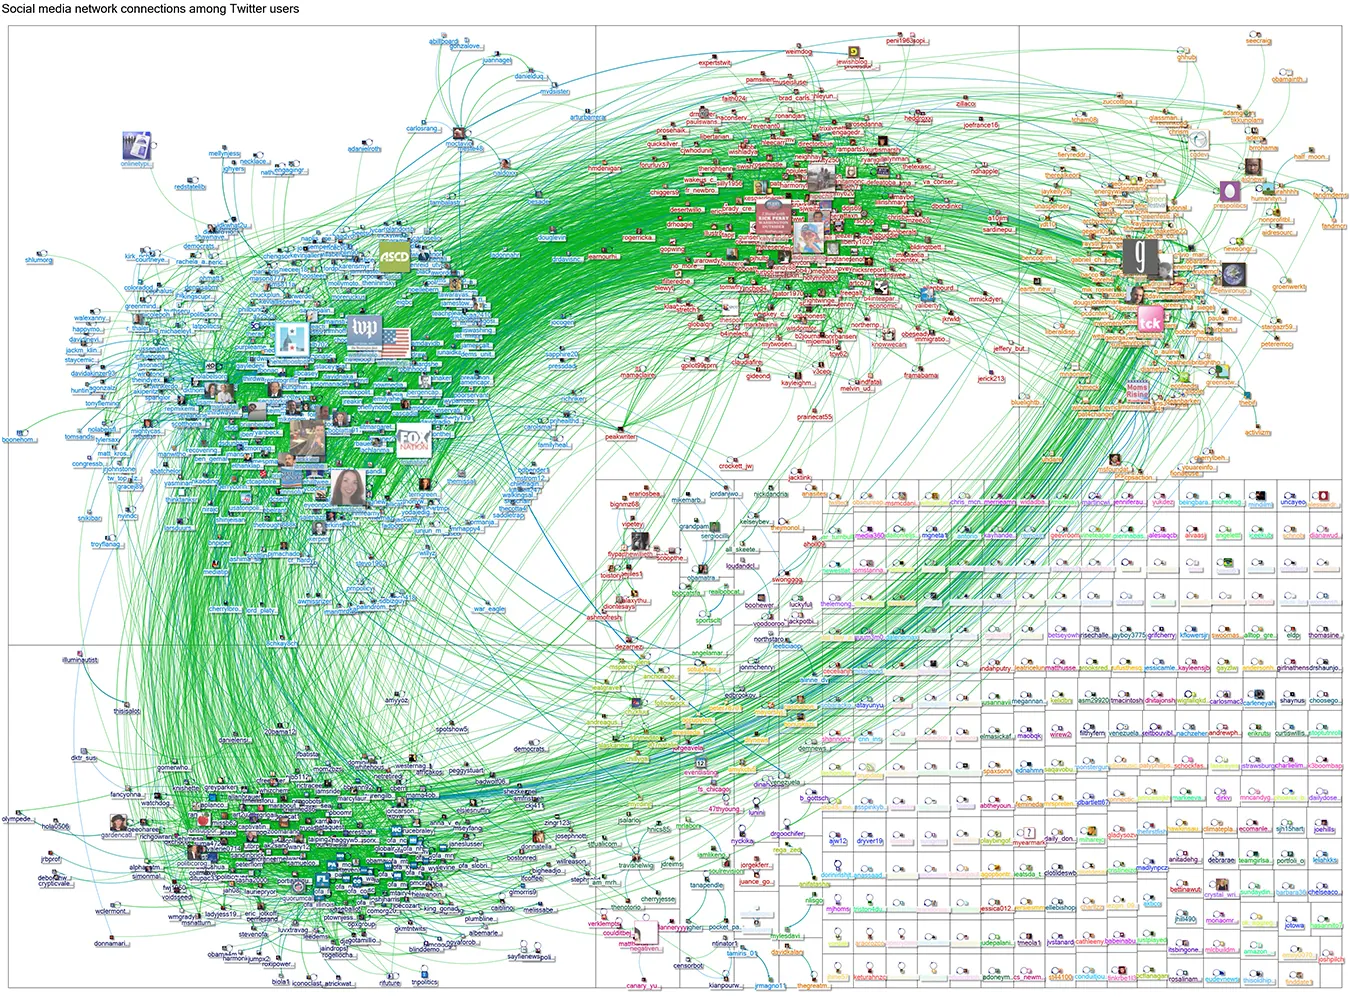 A graphic with thousands of lines tracing the relationships of people on Twitter. Four clusters of users are included, and several icons indicating news media are represented and followed by many people.